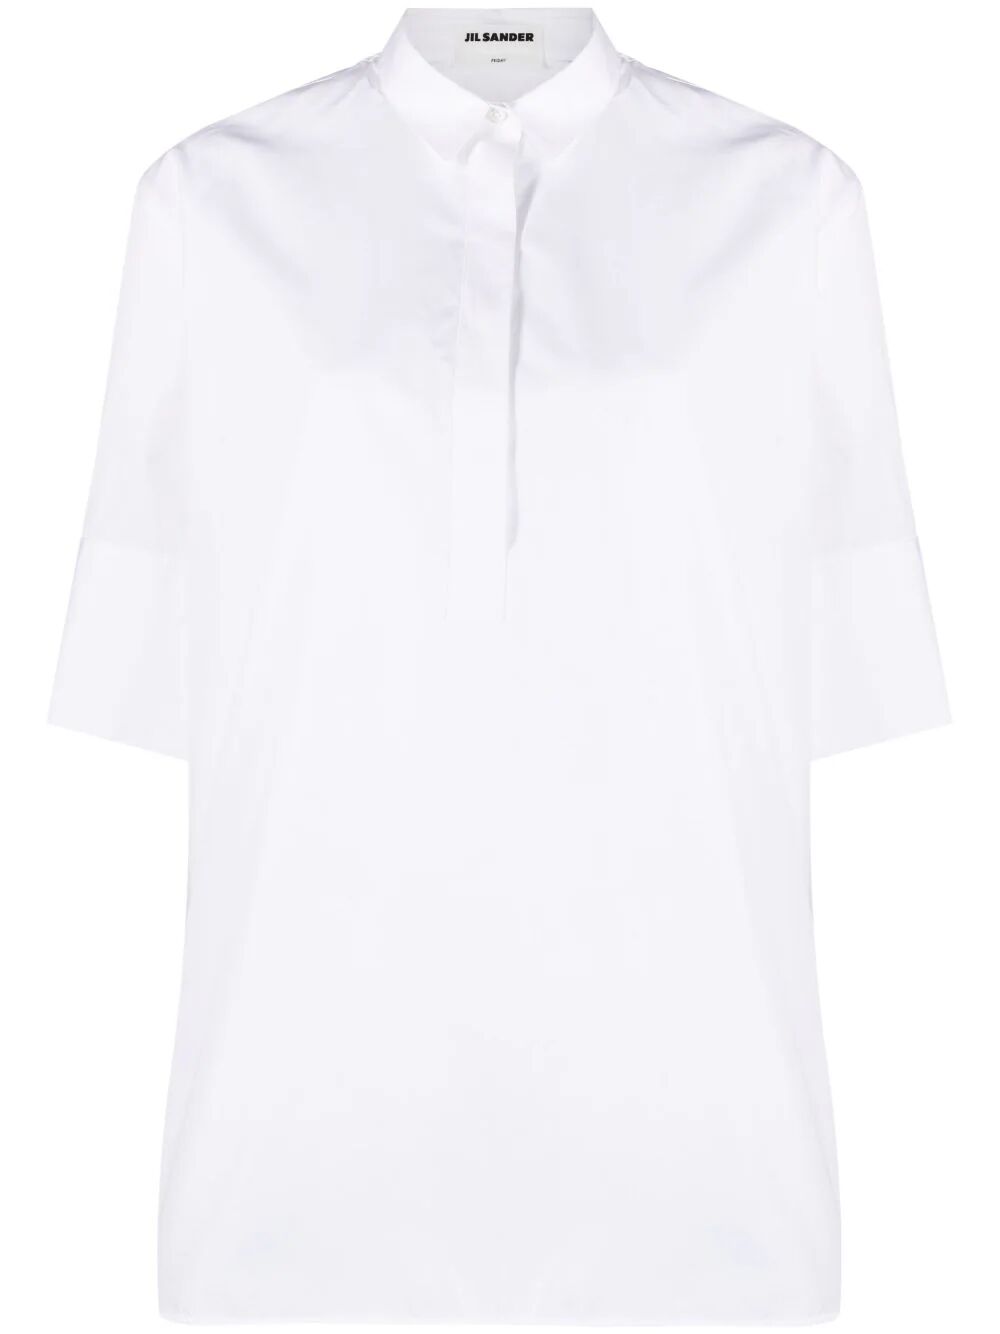 Friday Relaxed 3/4 Sleeves Shirt